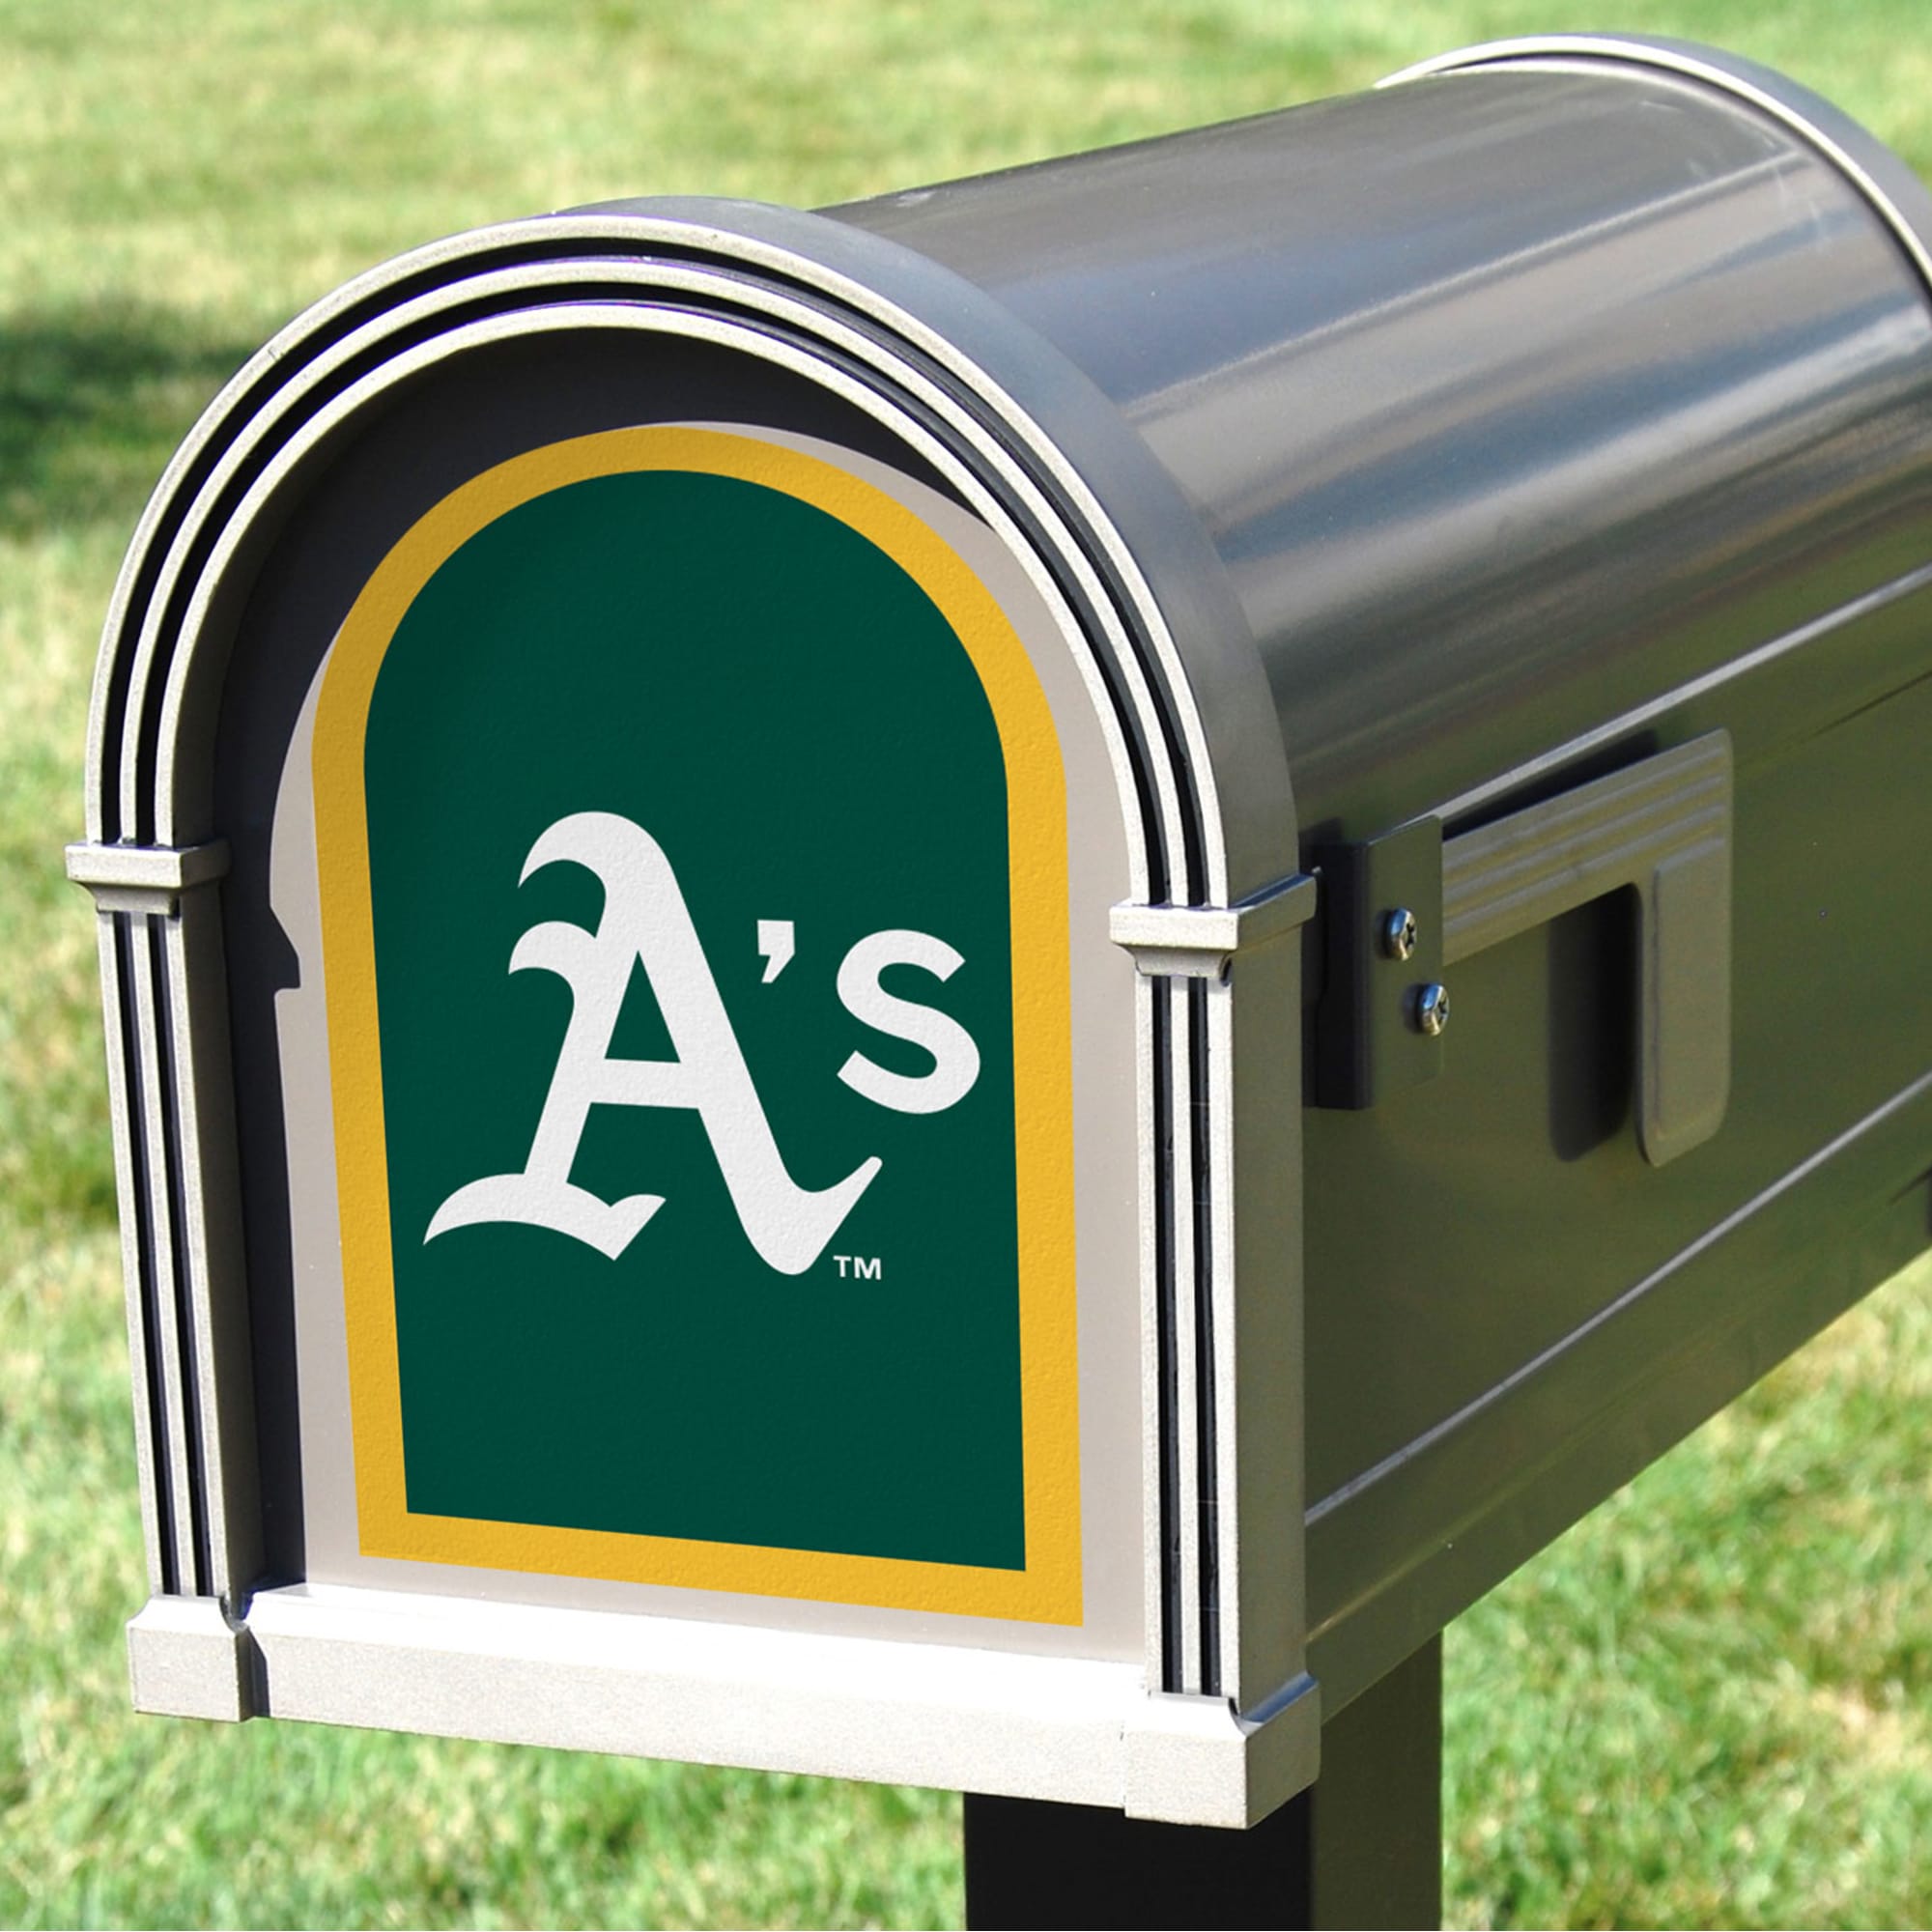 Oakland Athletics: Mailbox Logo - Officially Licensed MLB Outdoor Graphic 5.0"W x 8.0"H by Fathead | Wood/Aluminum